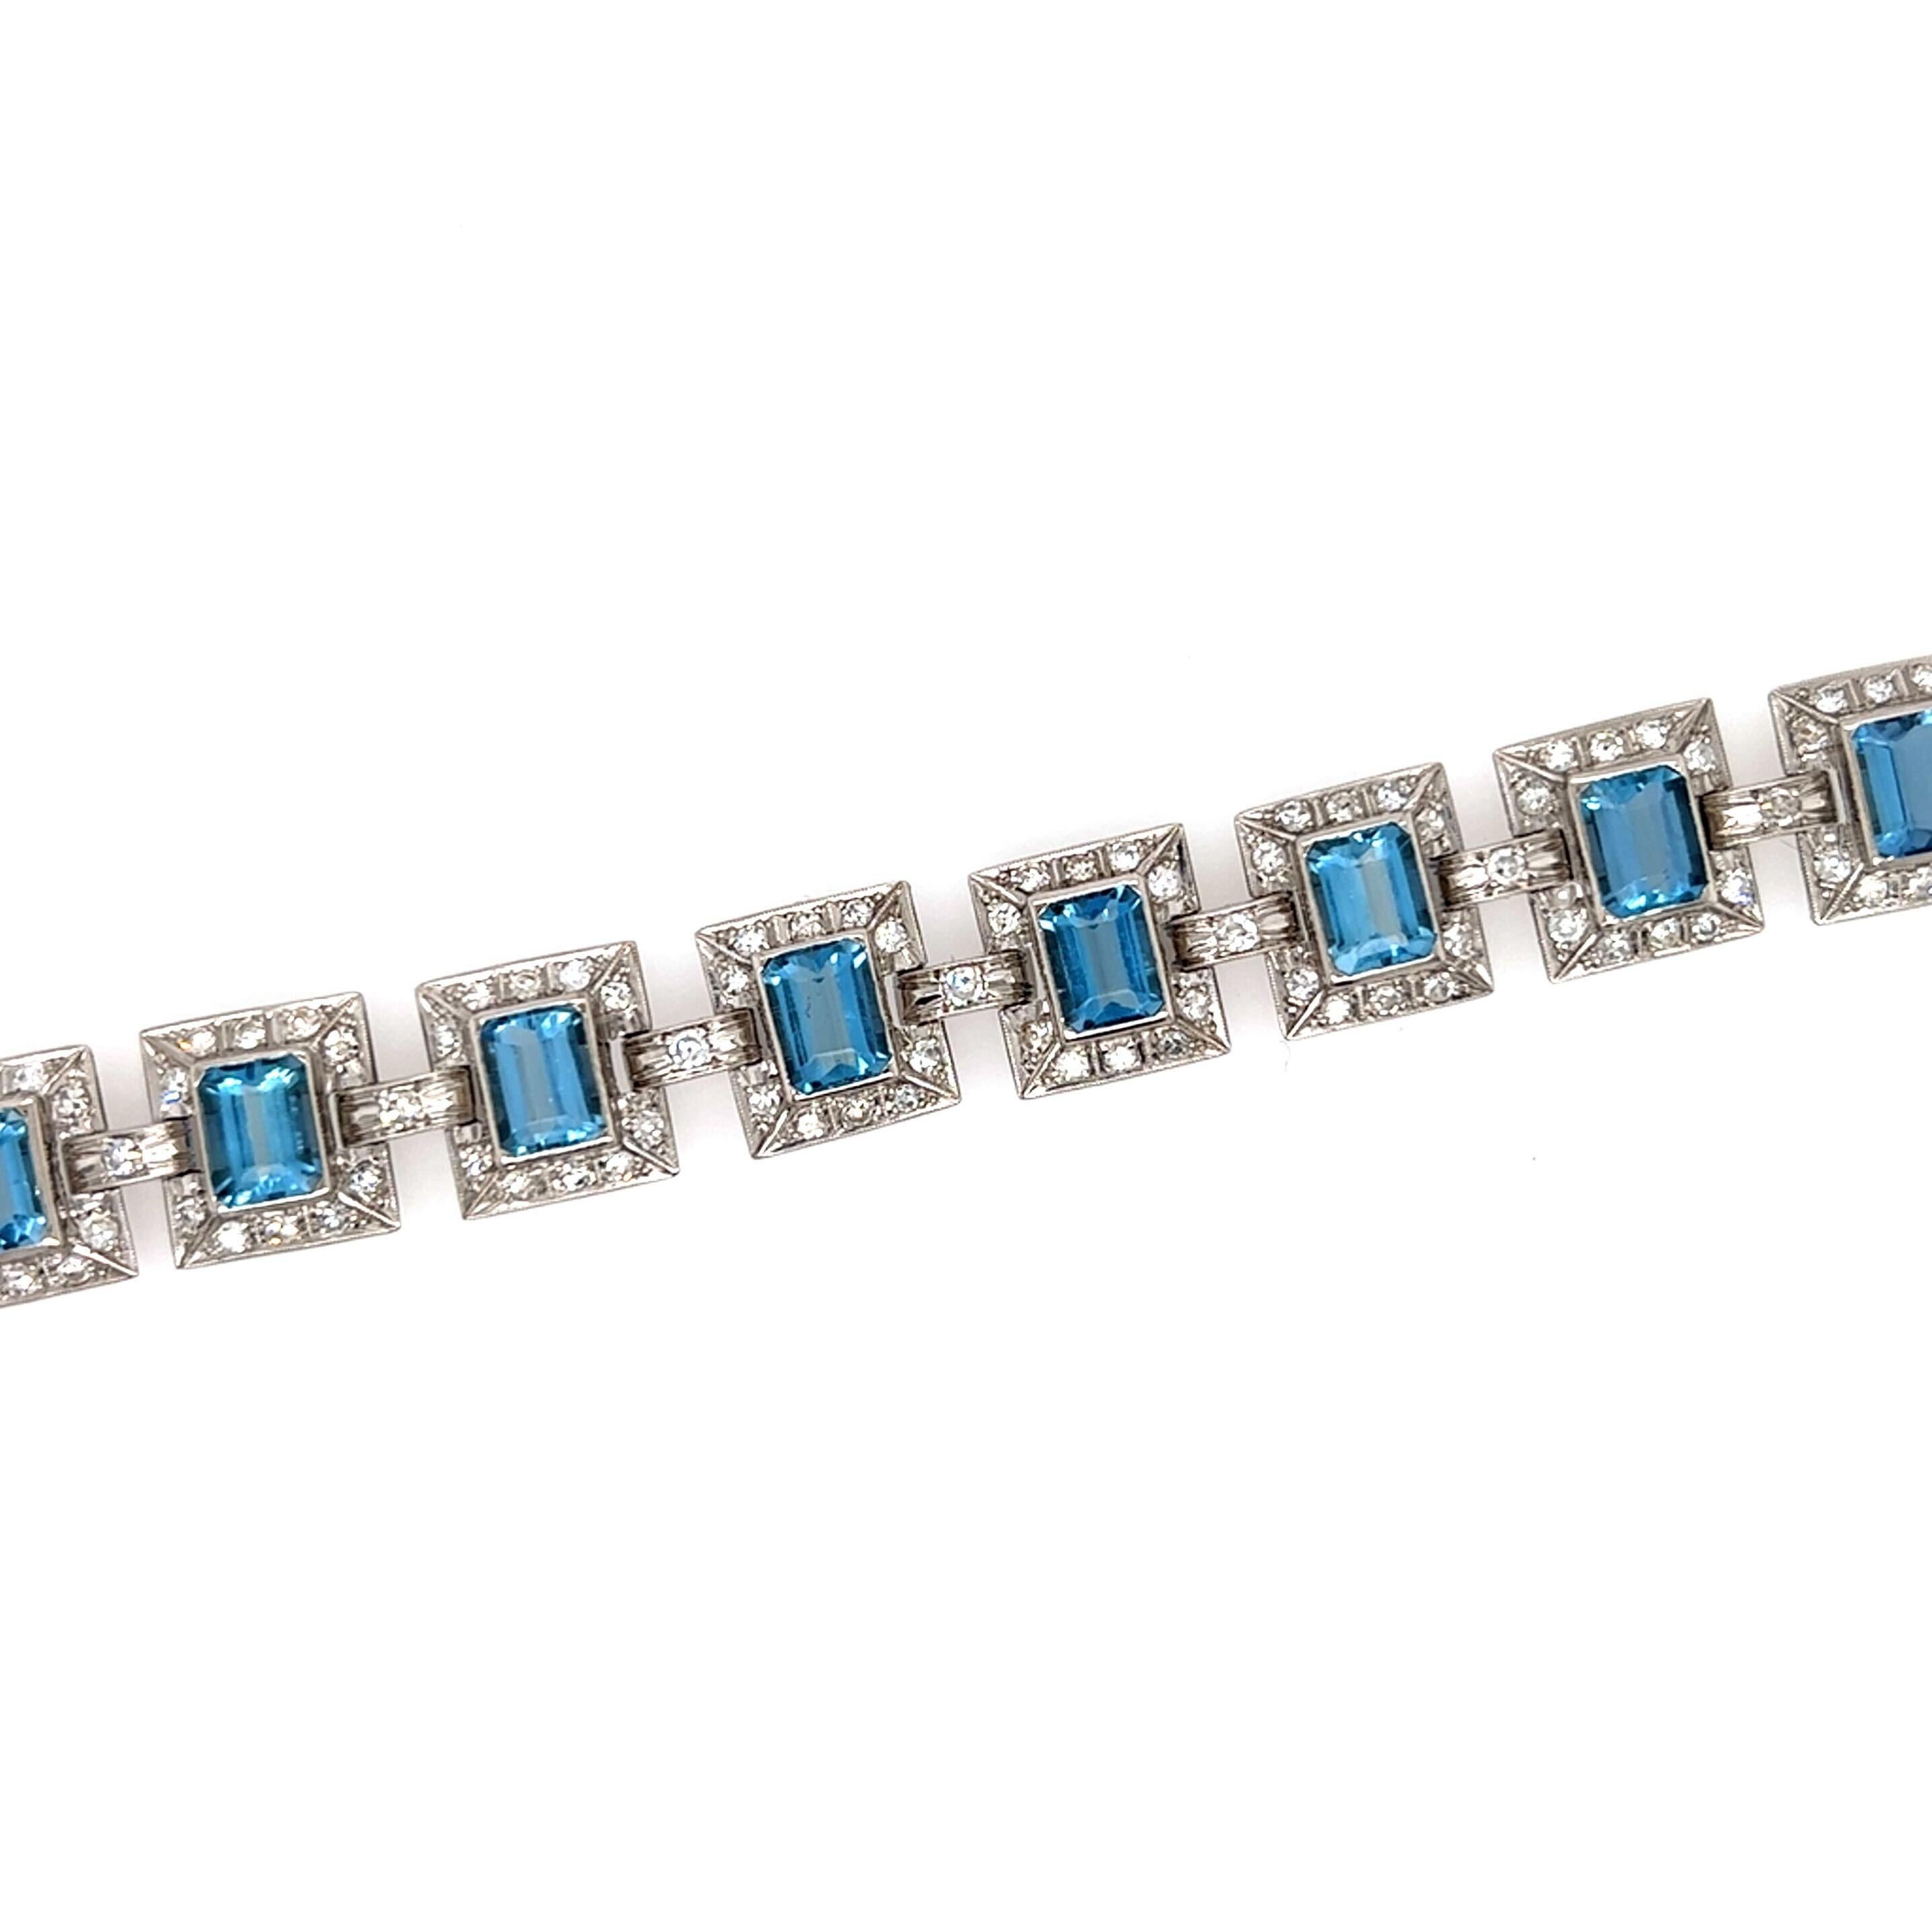 A platinum, aquamarine and diamond bracelet.  The bracelet formed of eleven (11) faceted rectangular aquamarines measuring approximately 6.87 x 5.27 mm. each within a frame of ten (10) brilliant cut diamonds and connected by links set with one (1)